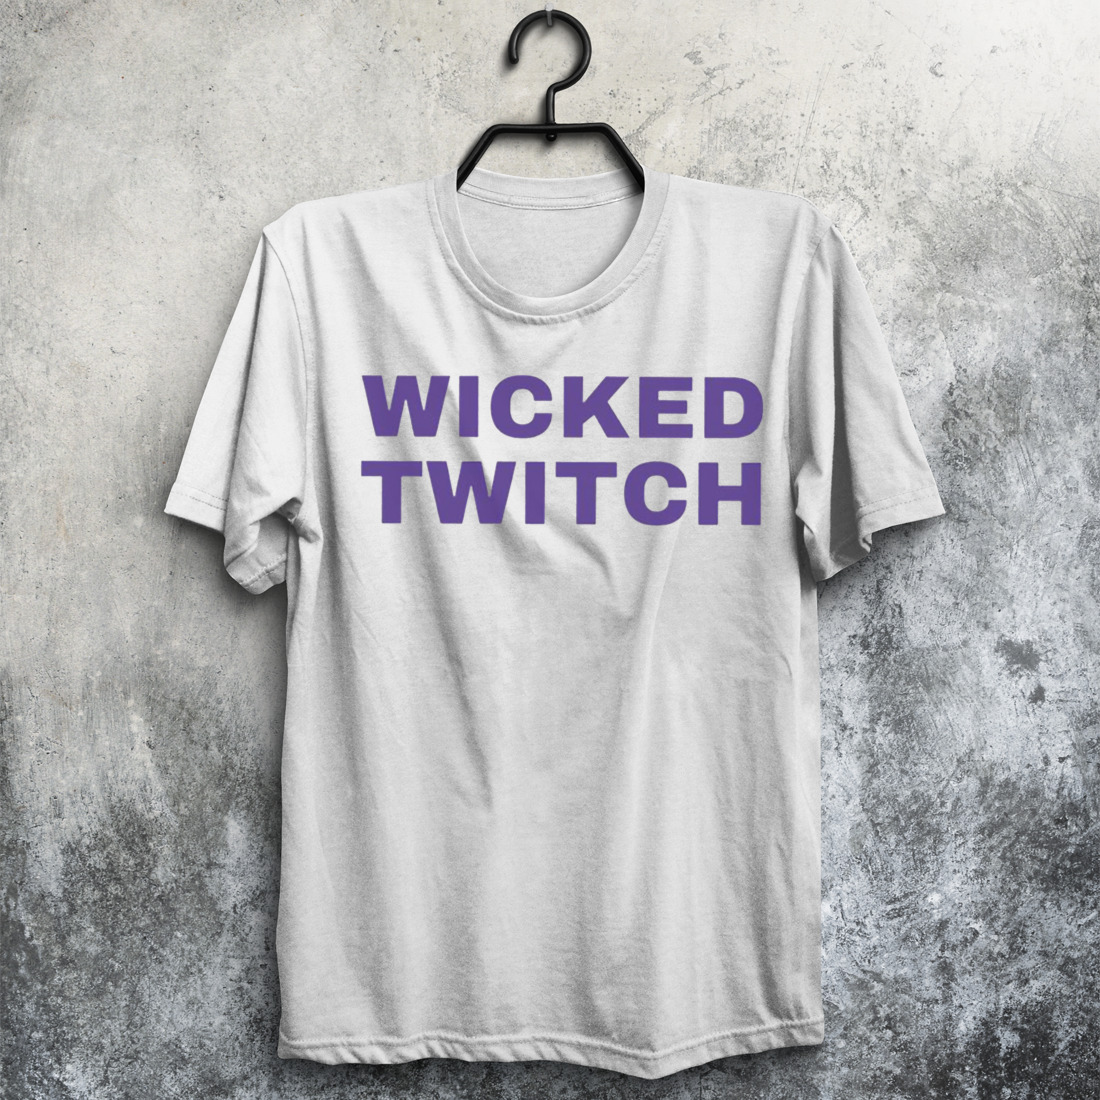 Wicked Twitch Icarly Penny Tees shirt